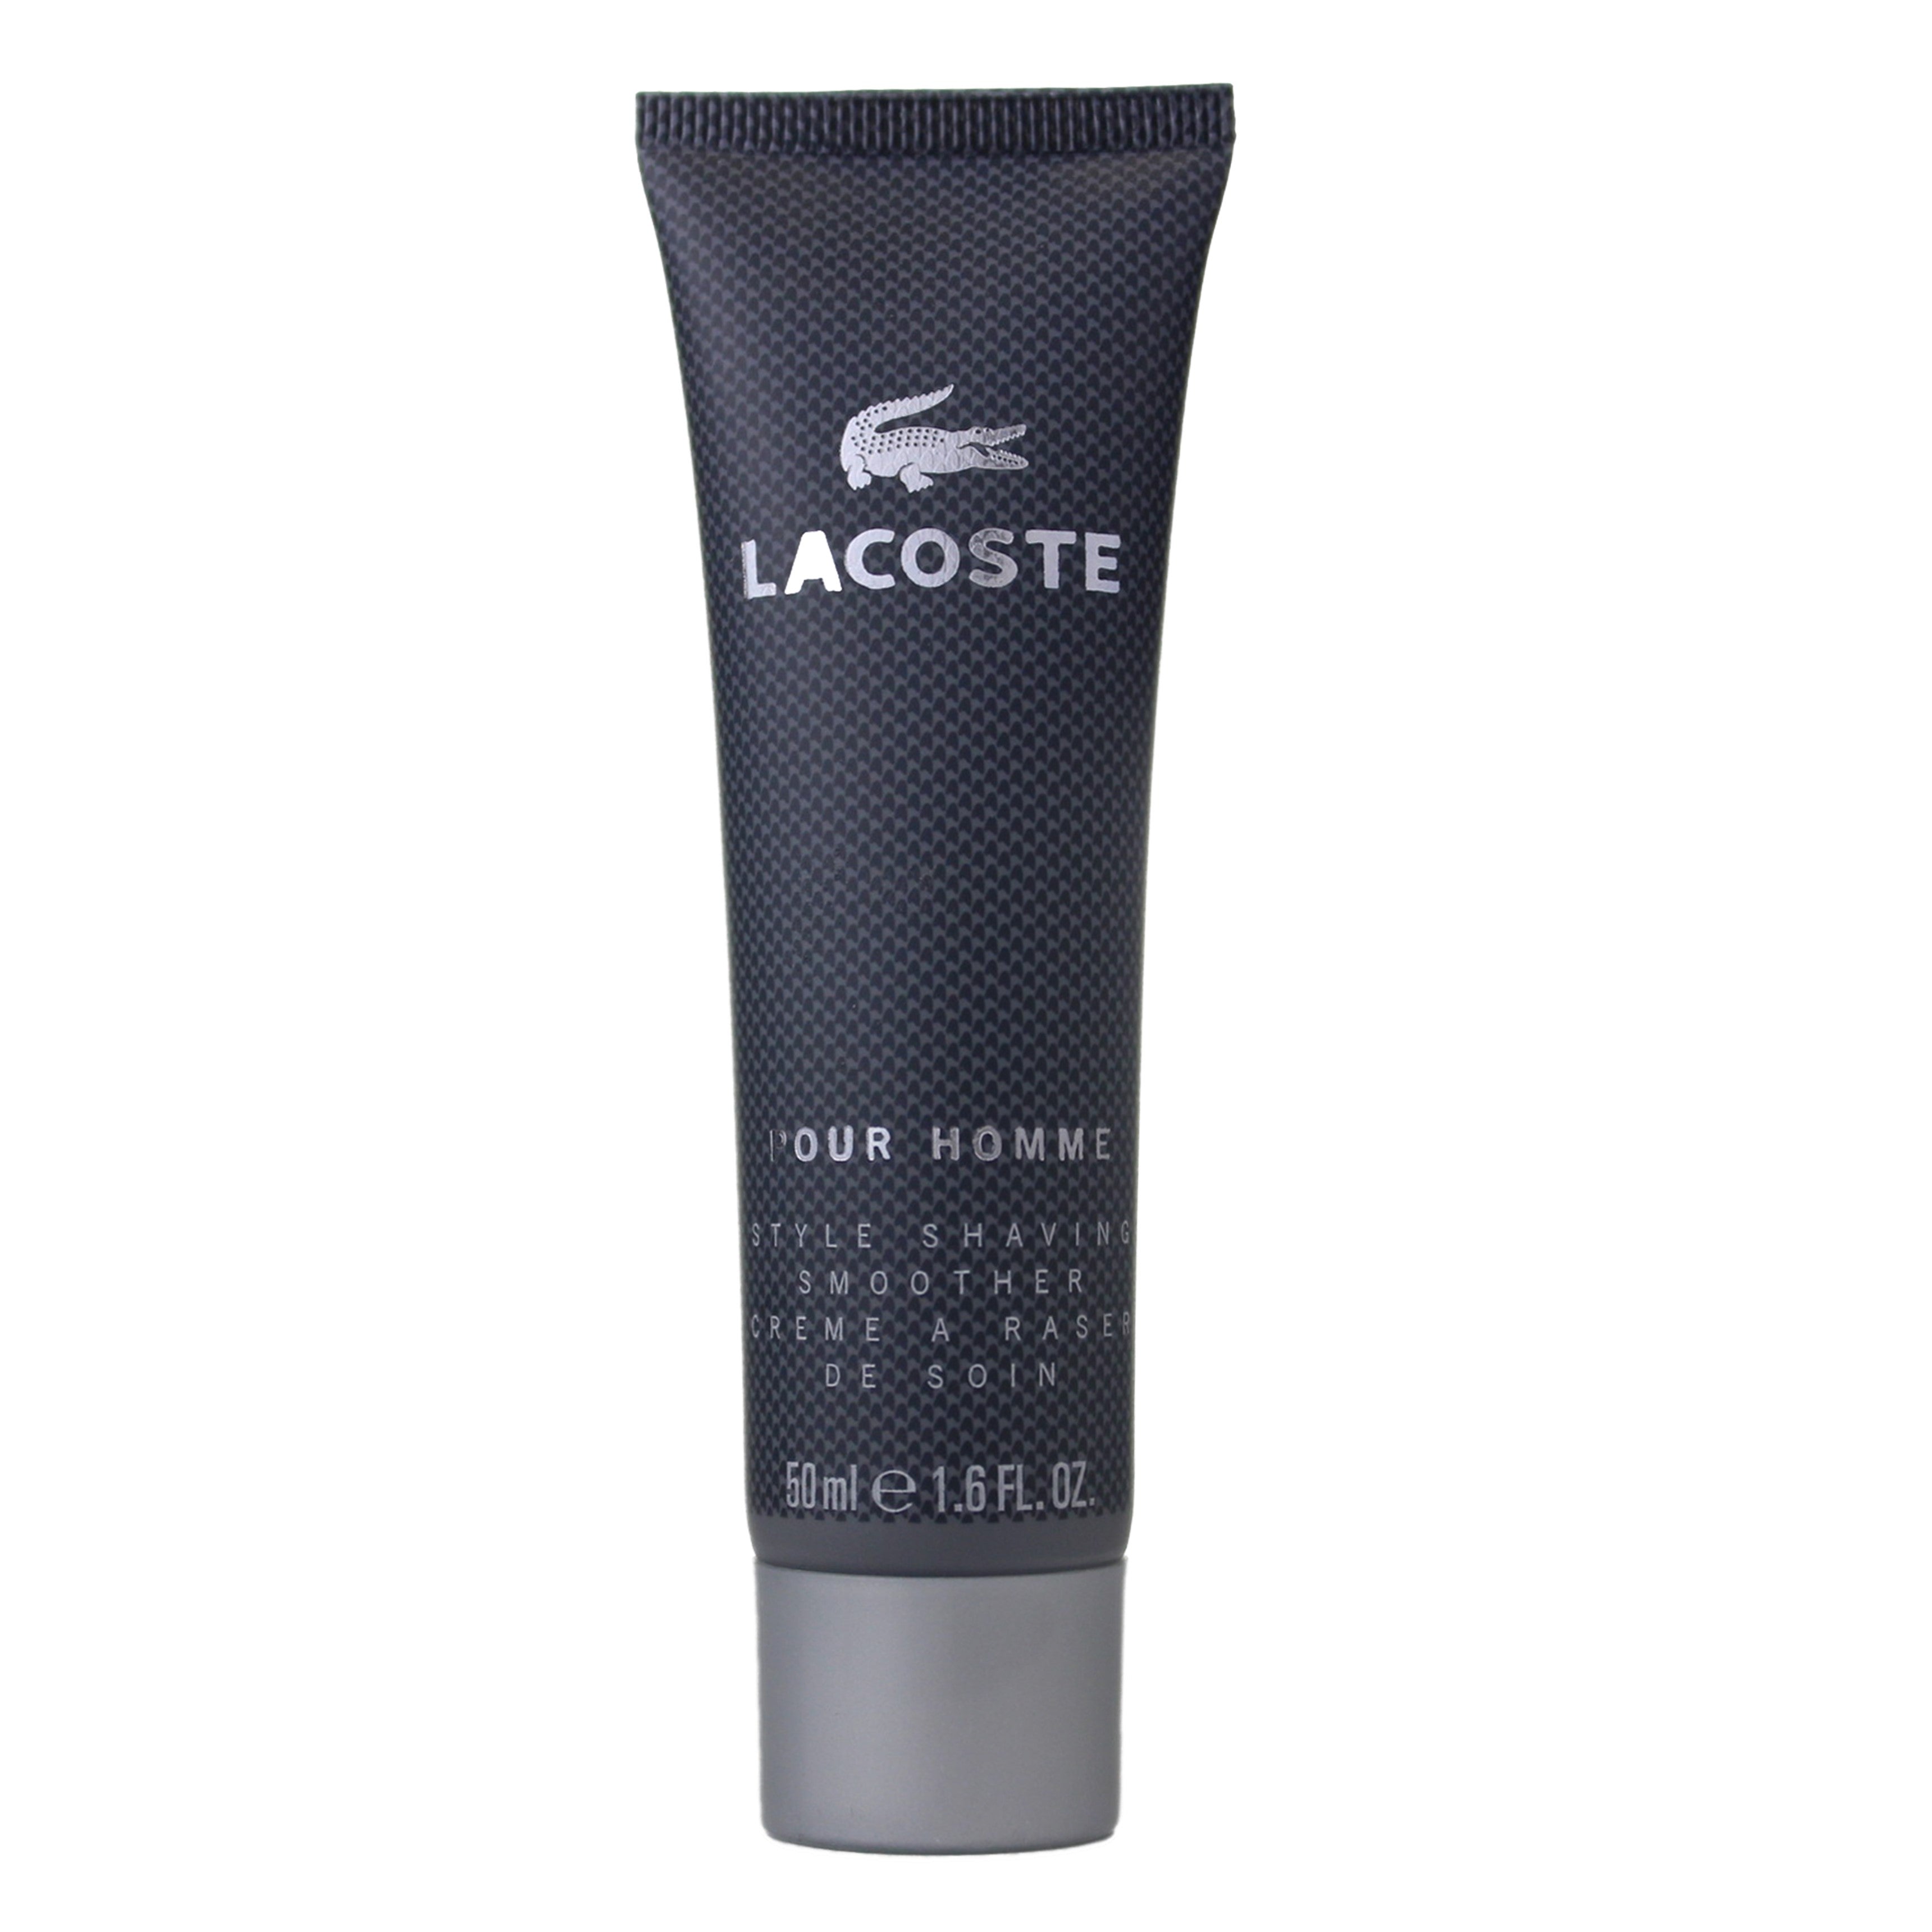 Lacoste Homme Style Shaving by Lacoste | 99Perfume.com